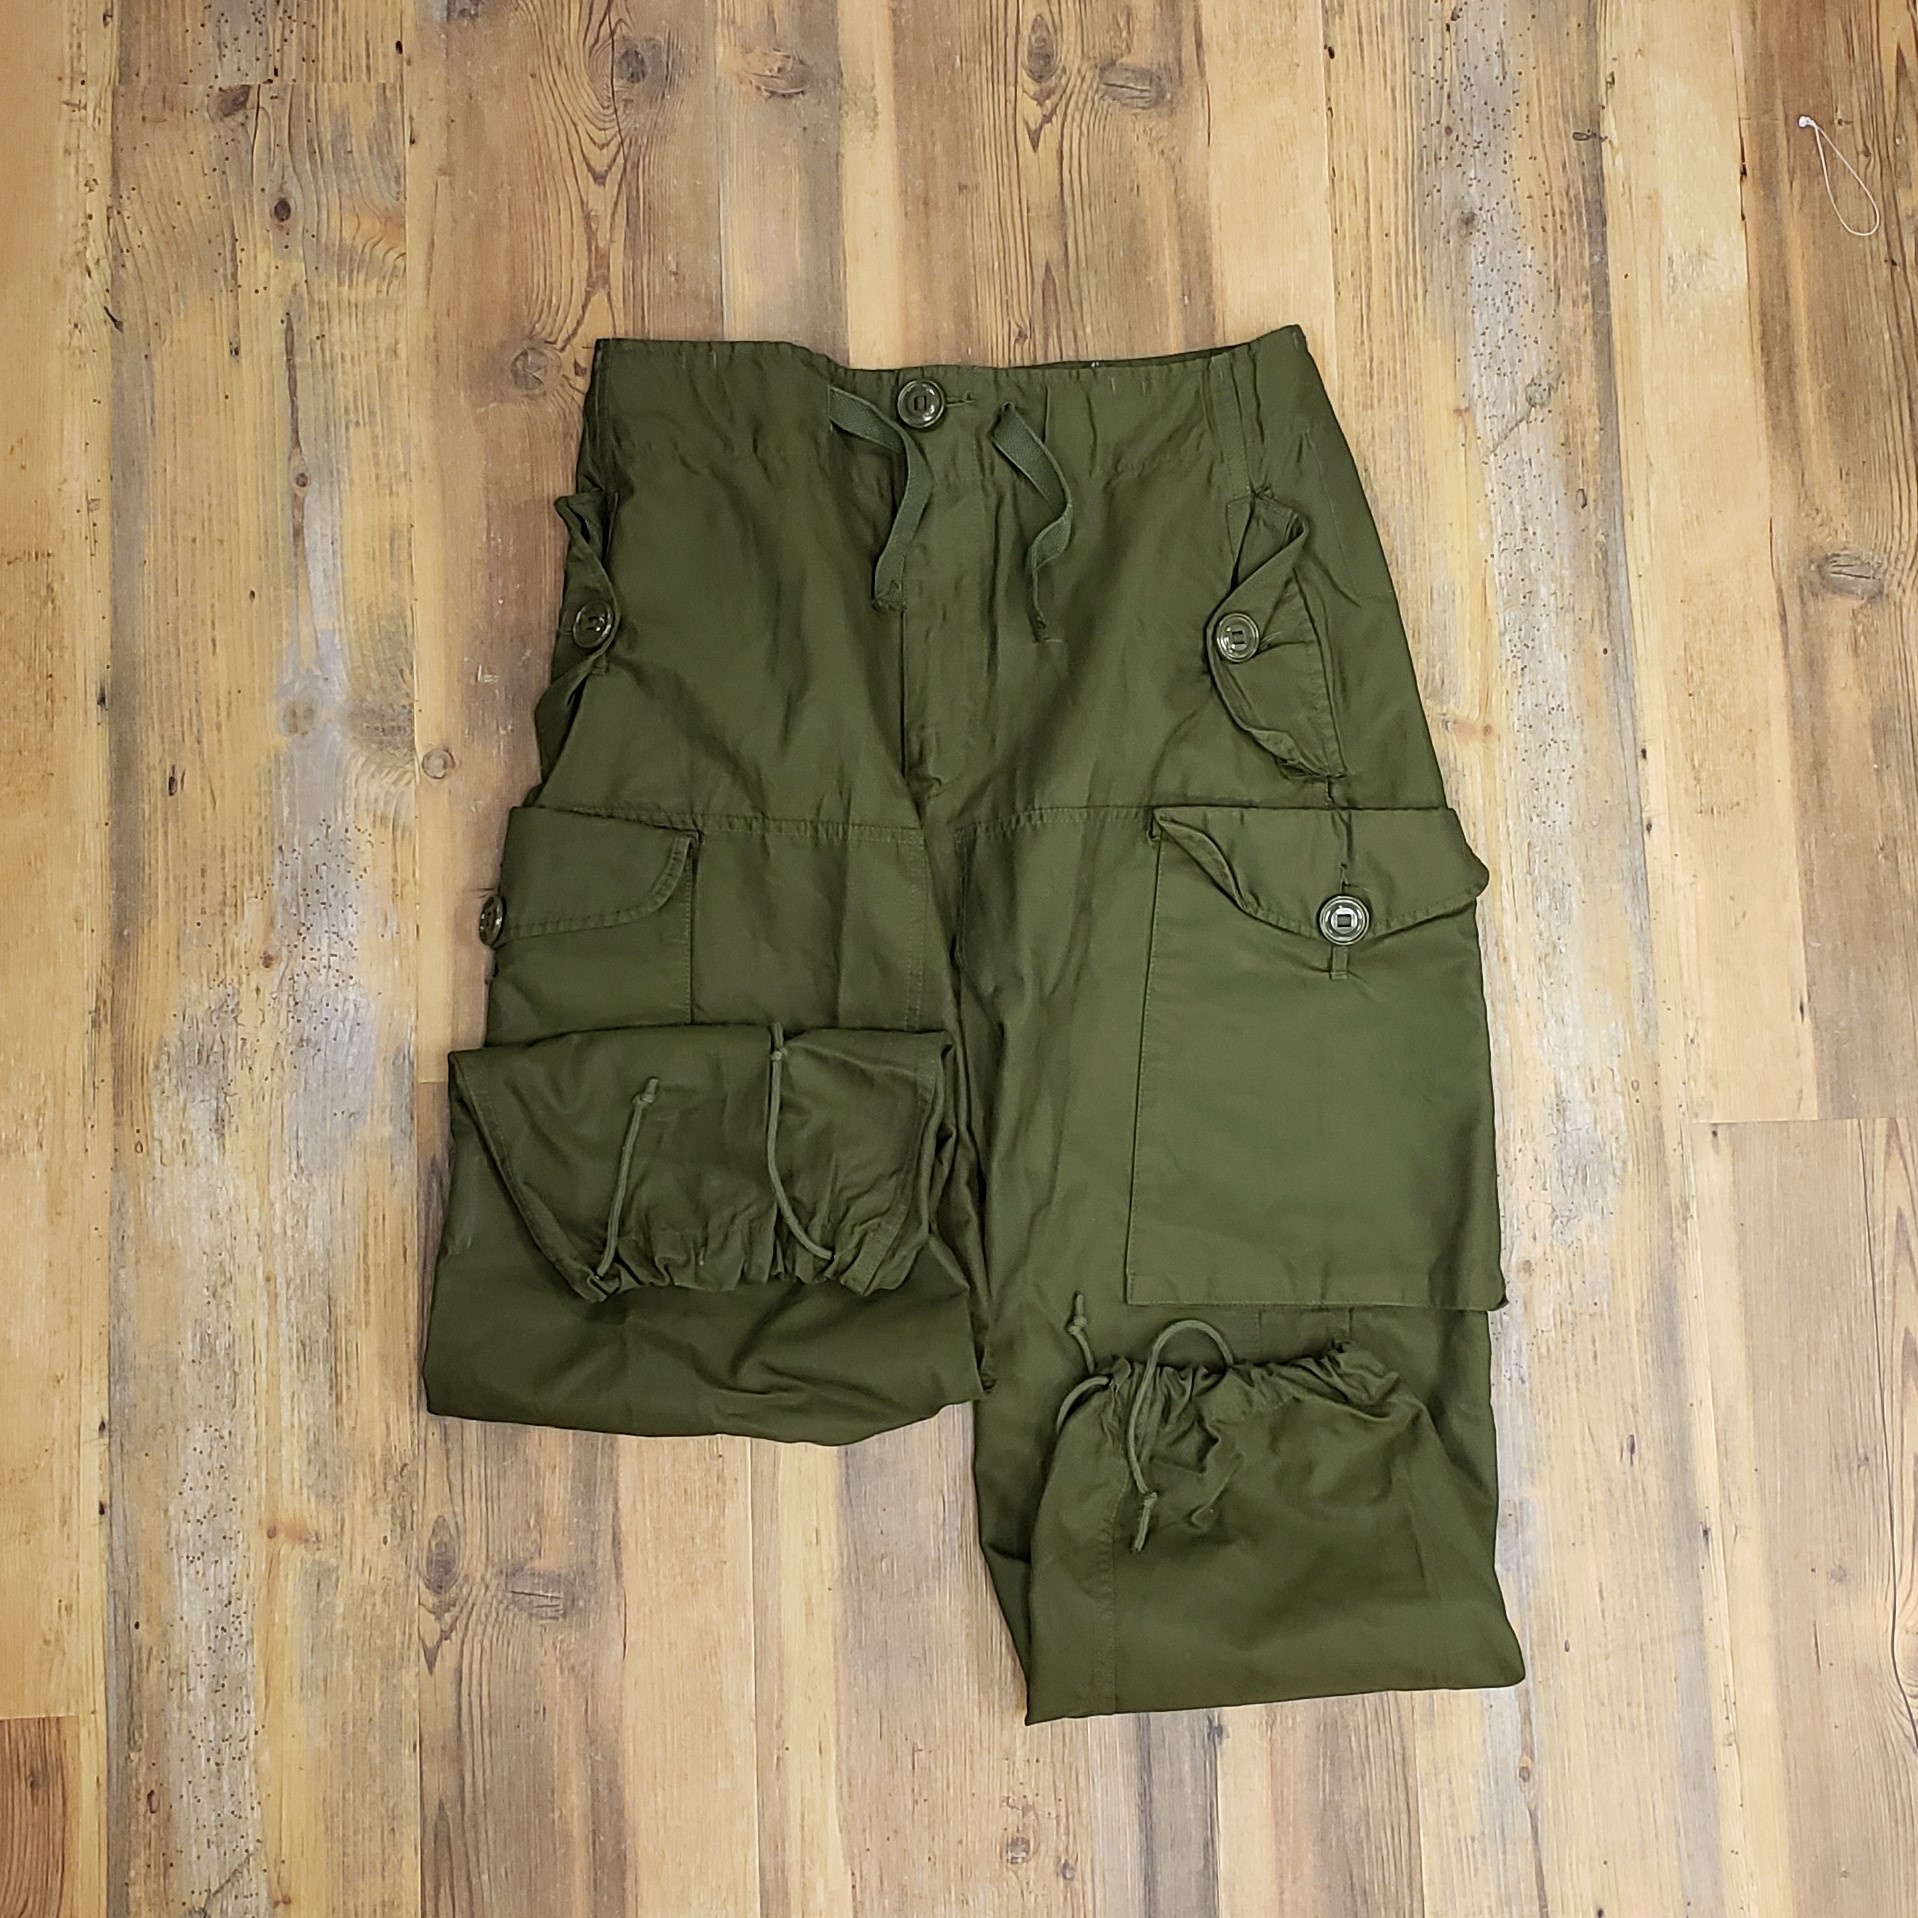 Canadian Air Force Cold Weather Trousers | Central Alberta Military Outlet